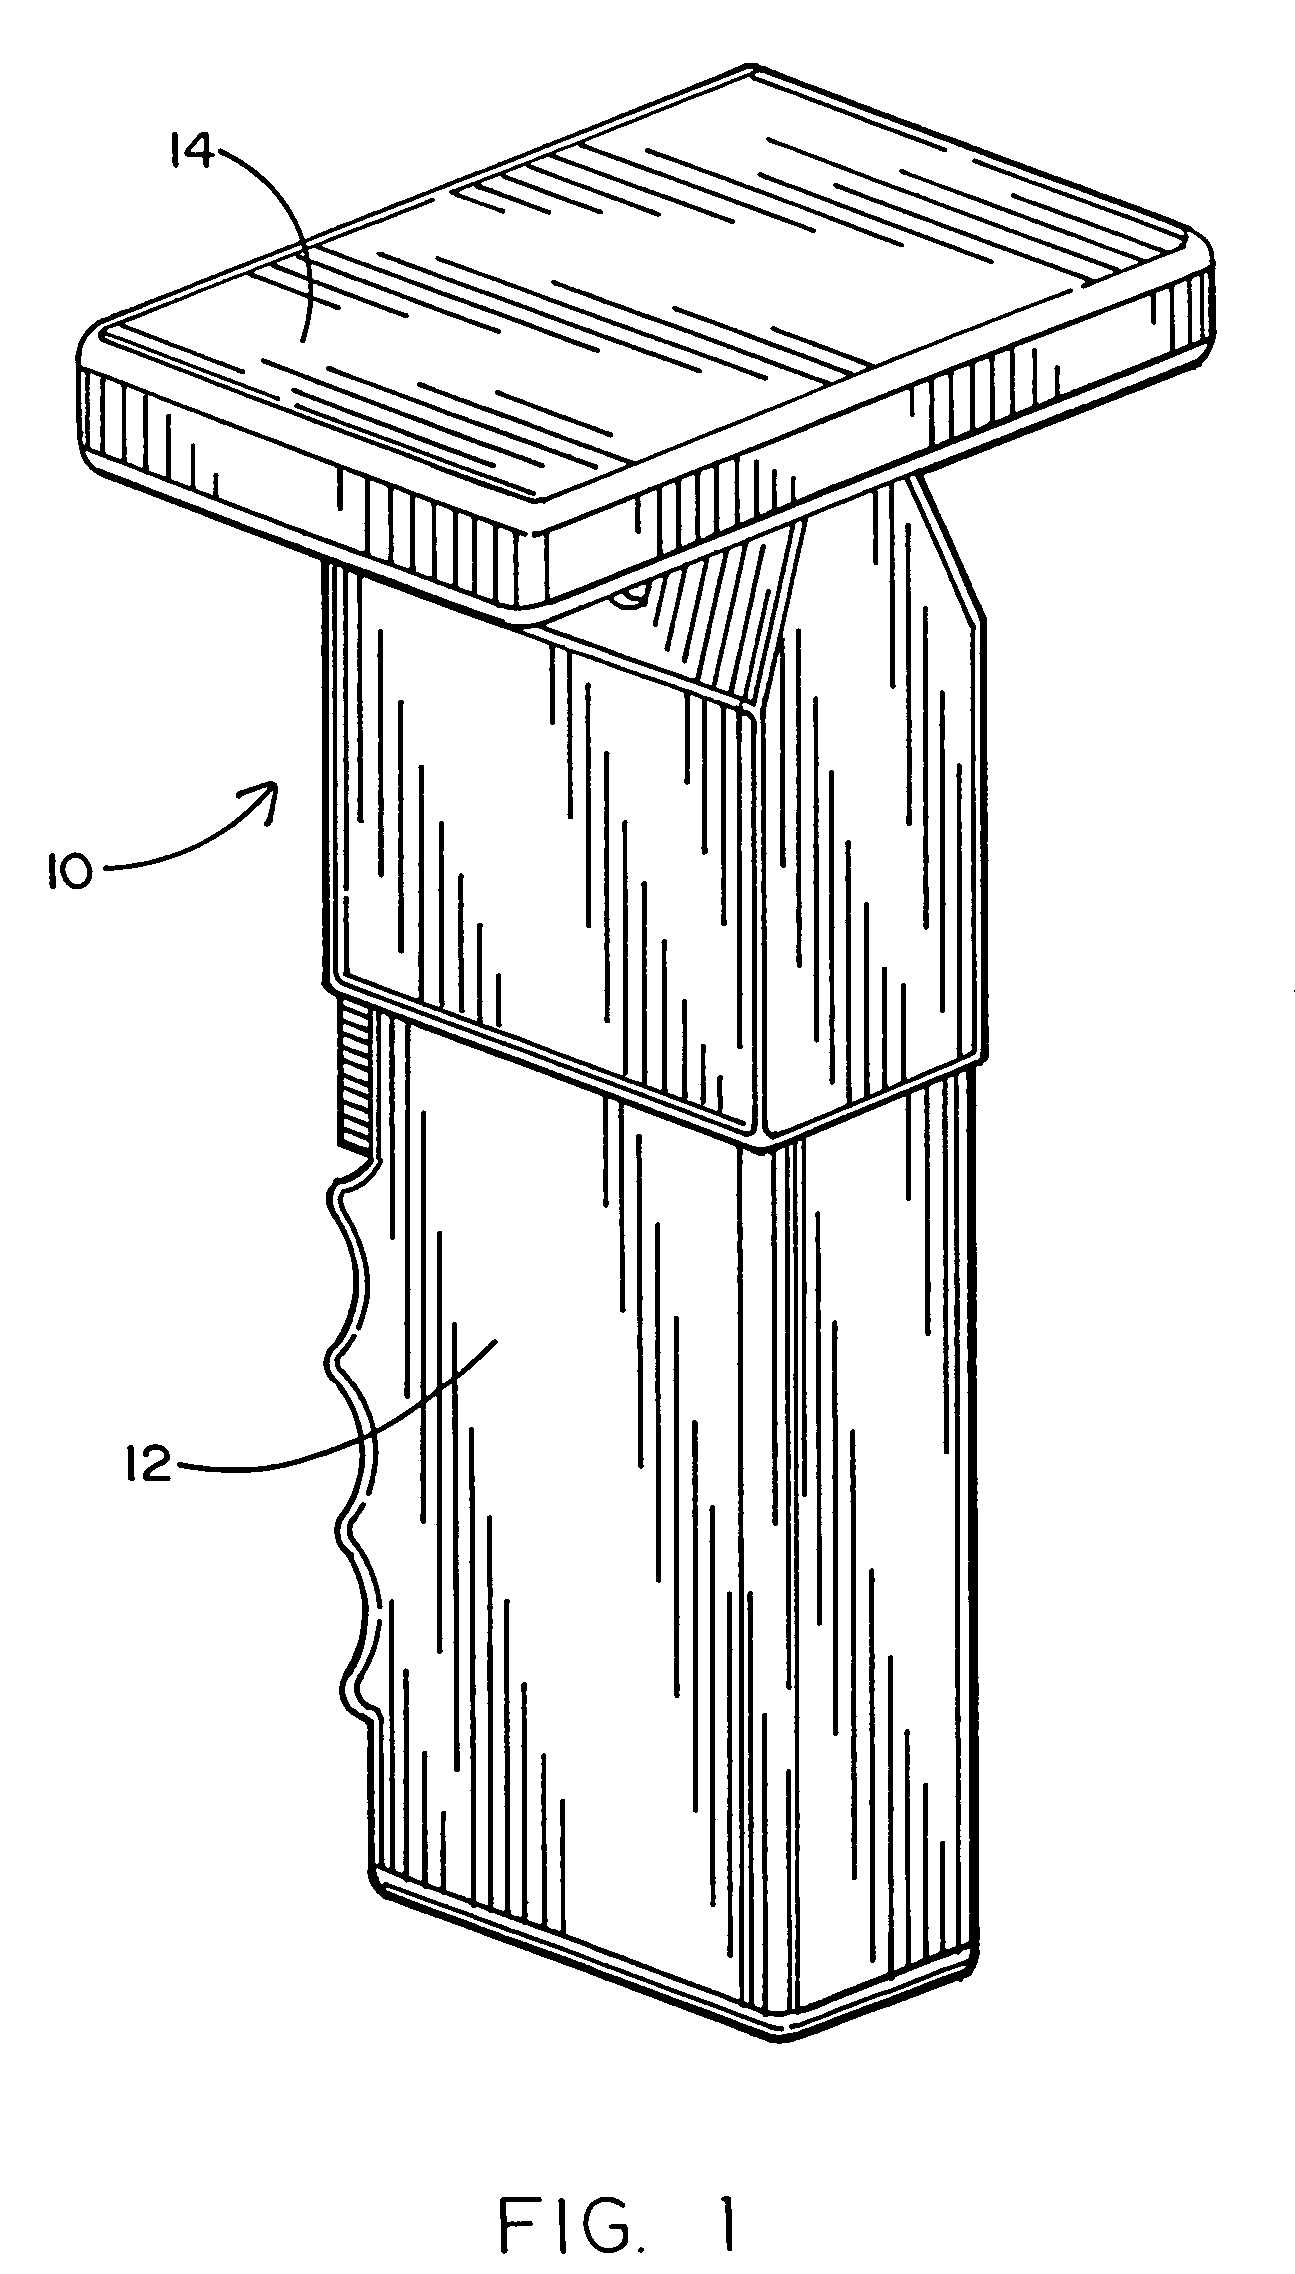 Method and apparatus for improving the effectiveness of electrical discharge weapons